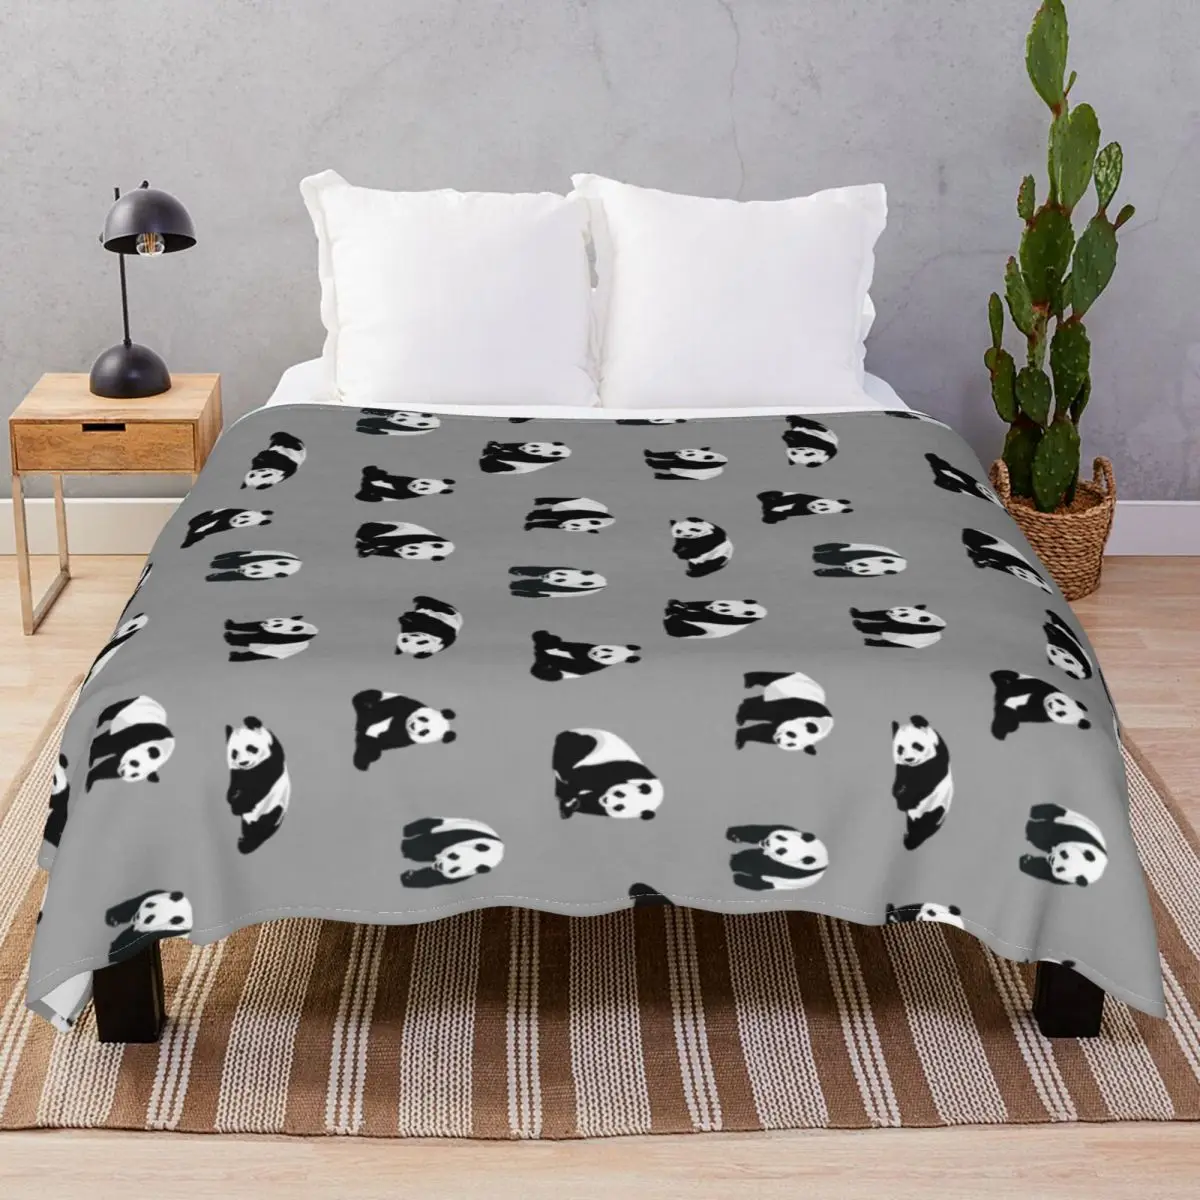 Pandas On Grey Blankets Flannel Spring/Autumn Warm Throw Blanket for Bed Sofa Travel Office